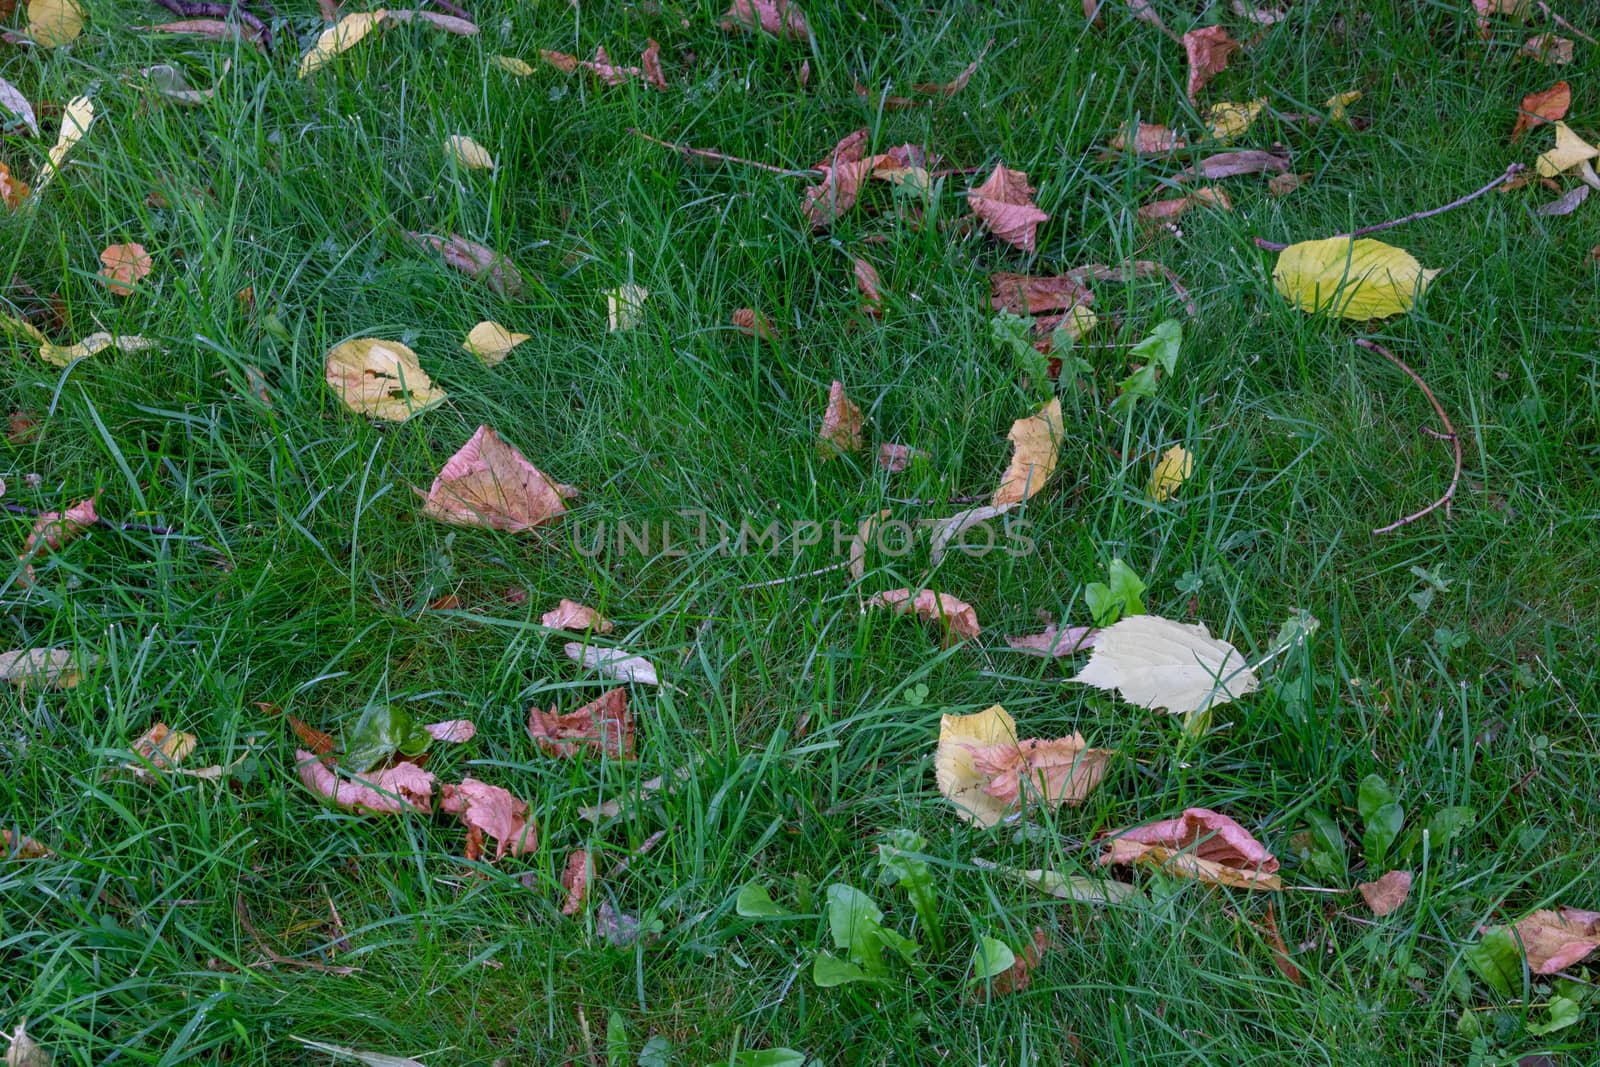 Fallen maple leaves on grass field. Autumn concept of fallen leaves on a green grass lawn. Dry leaves contrast with green grass